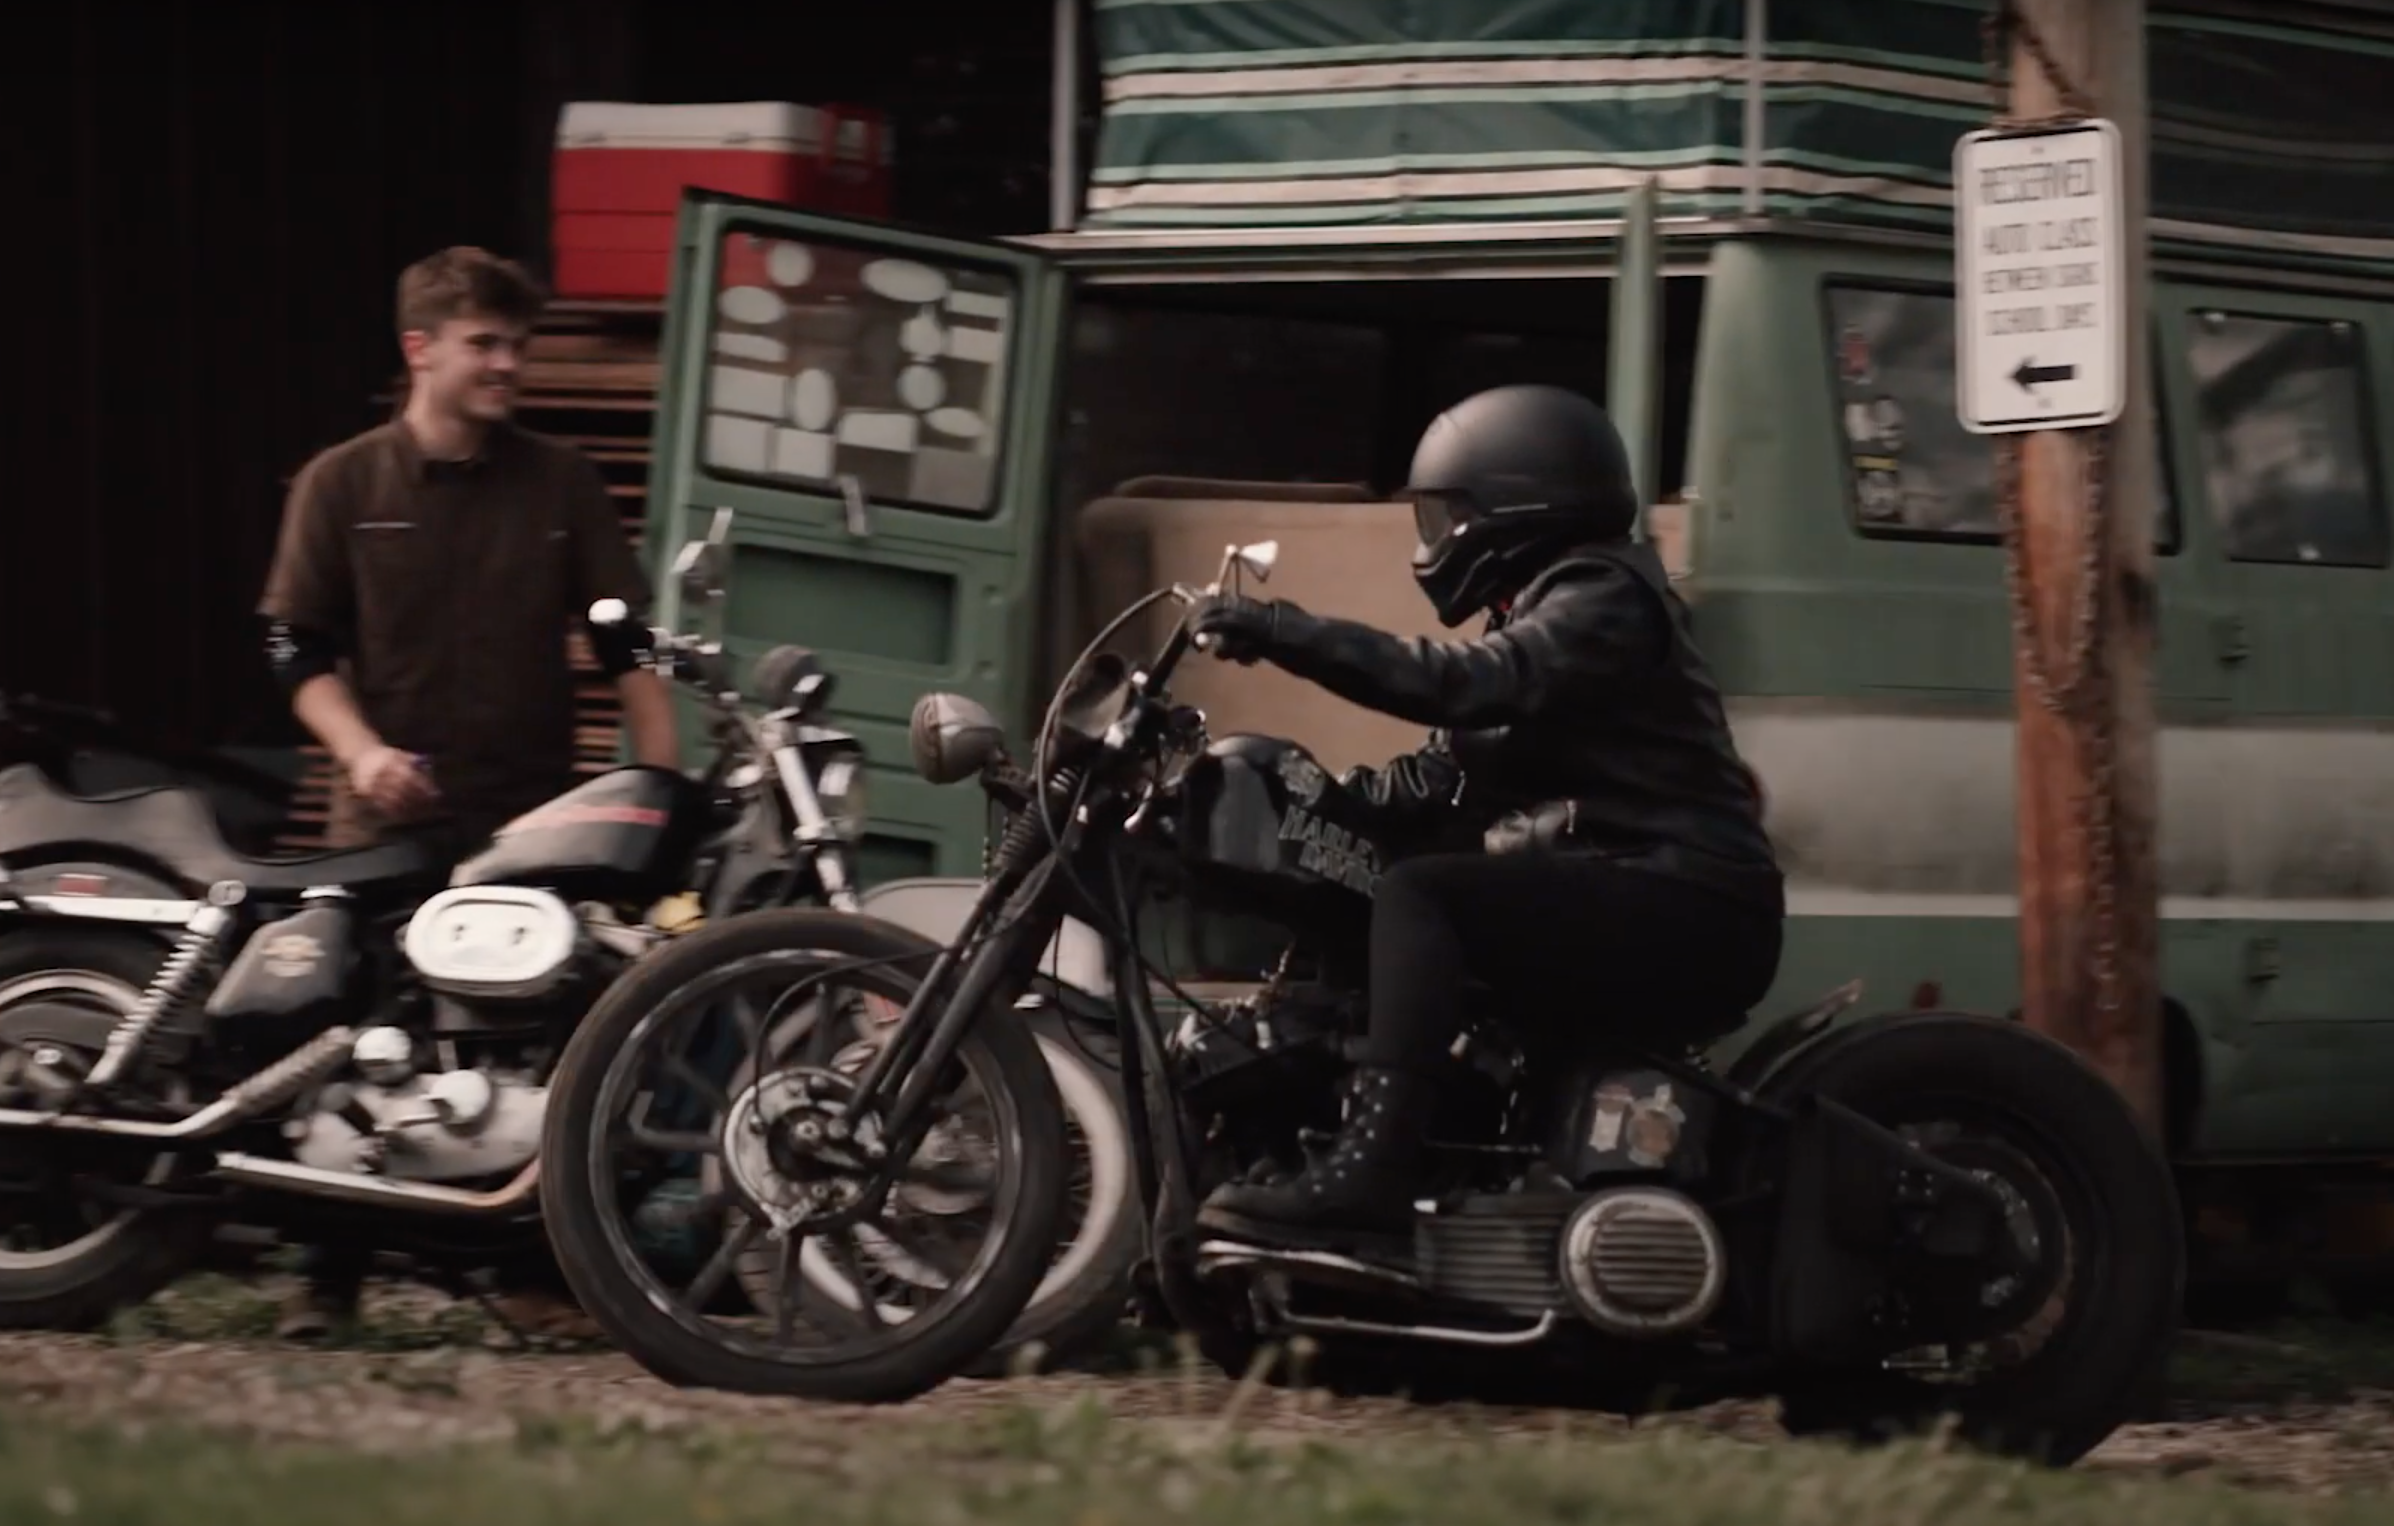 Jason Momoa And Harley Davidson Team Up Again For The United We Will Ride Campaign Webbikeworld